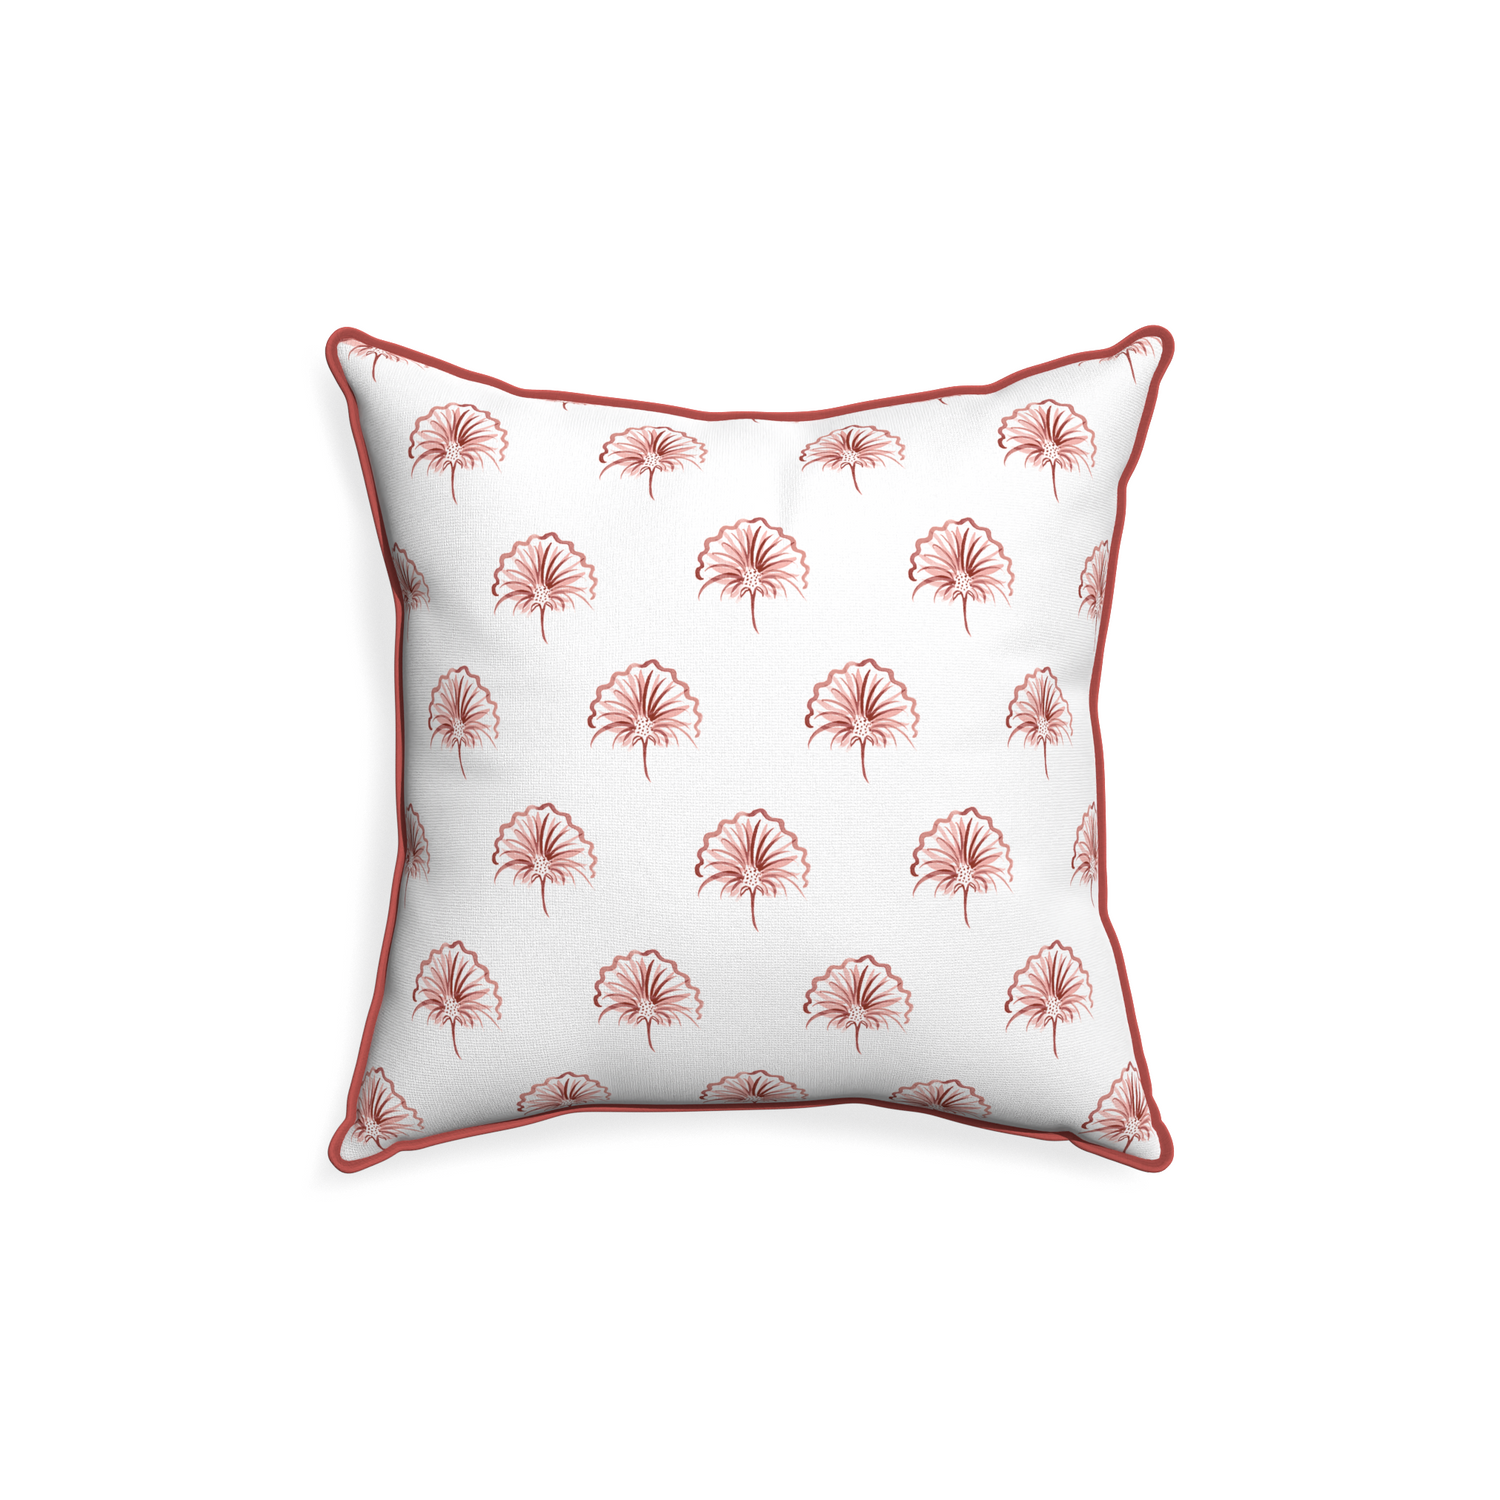 18-square penelope rose custom pillow with c piping on white background